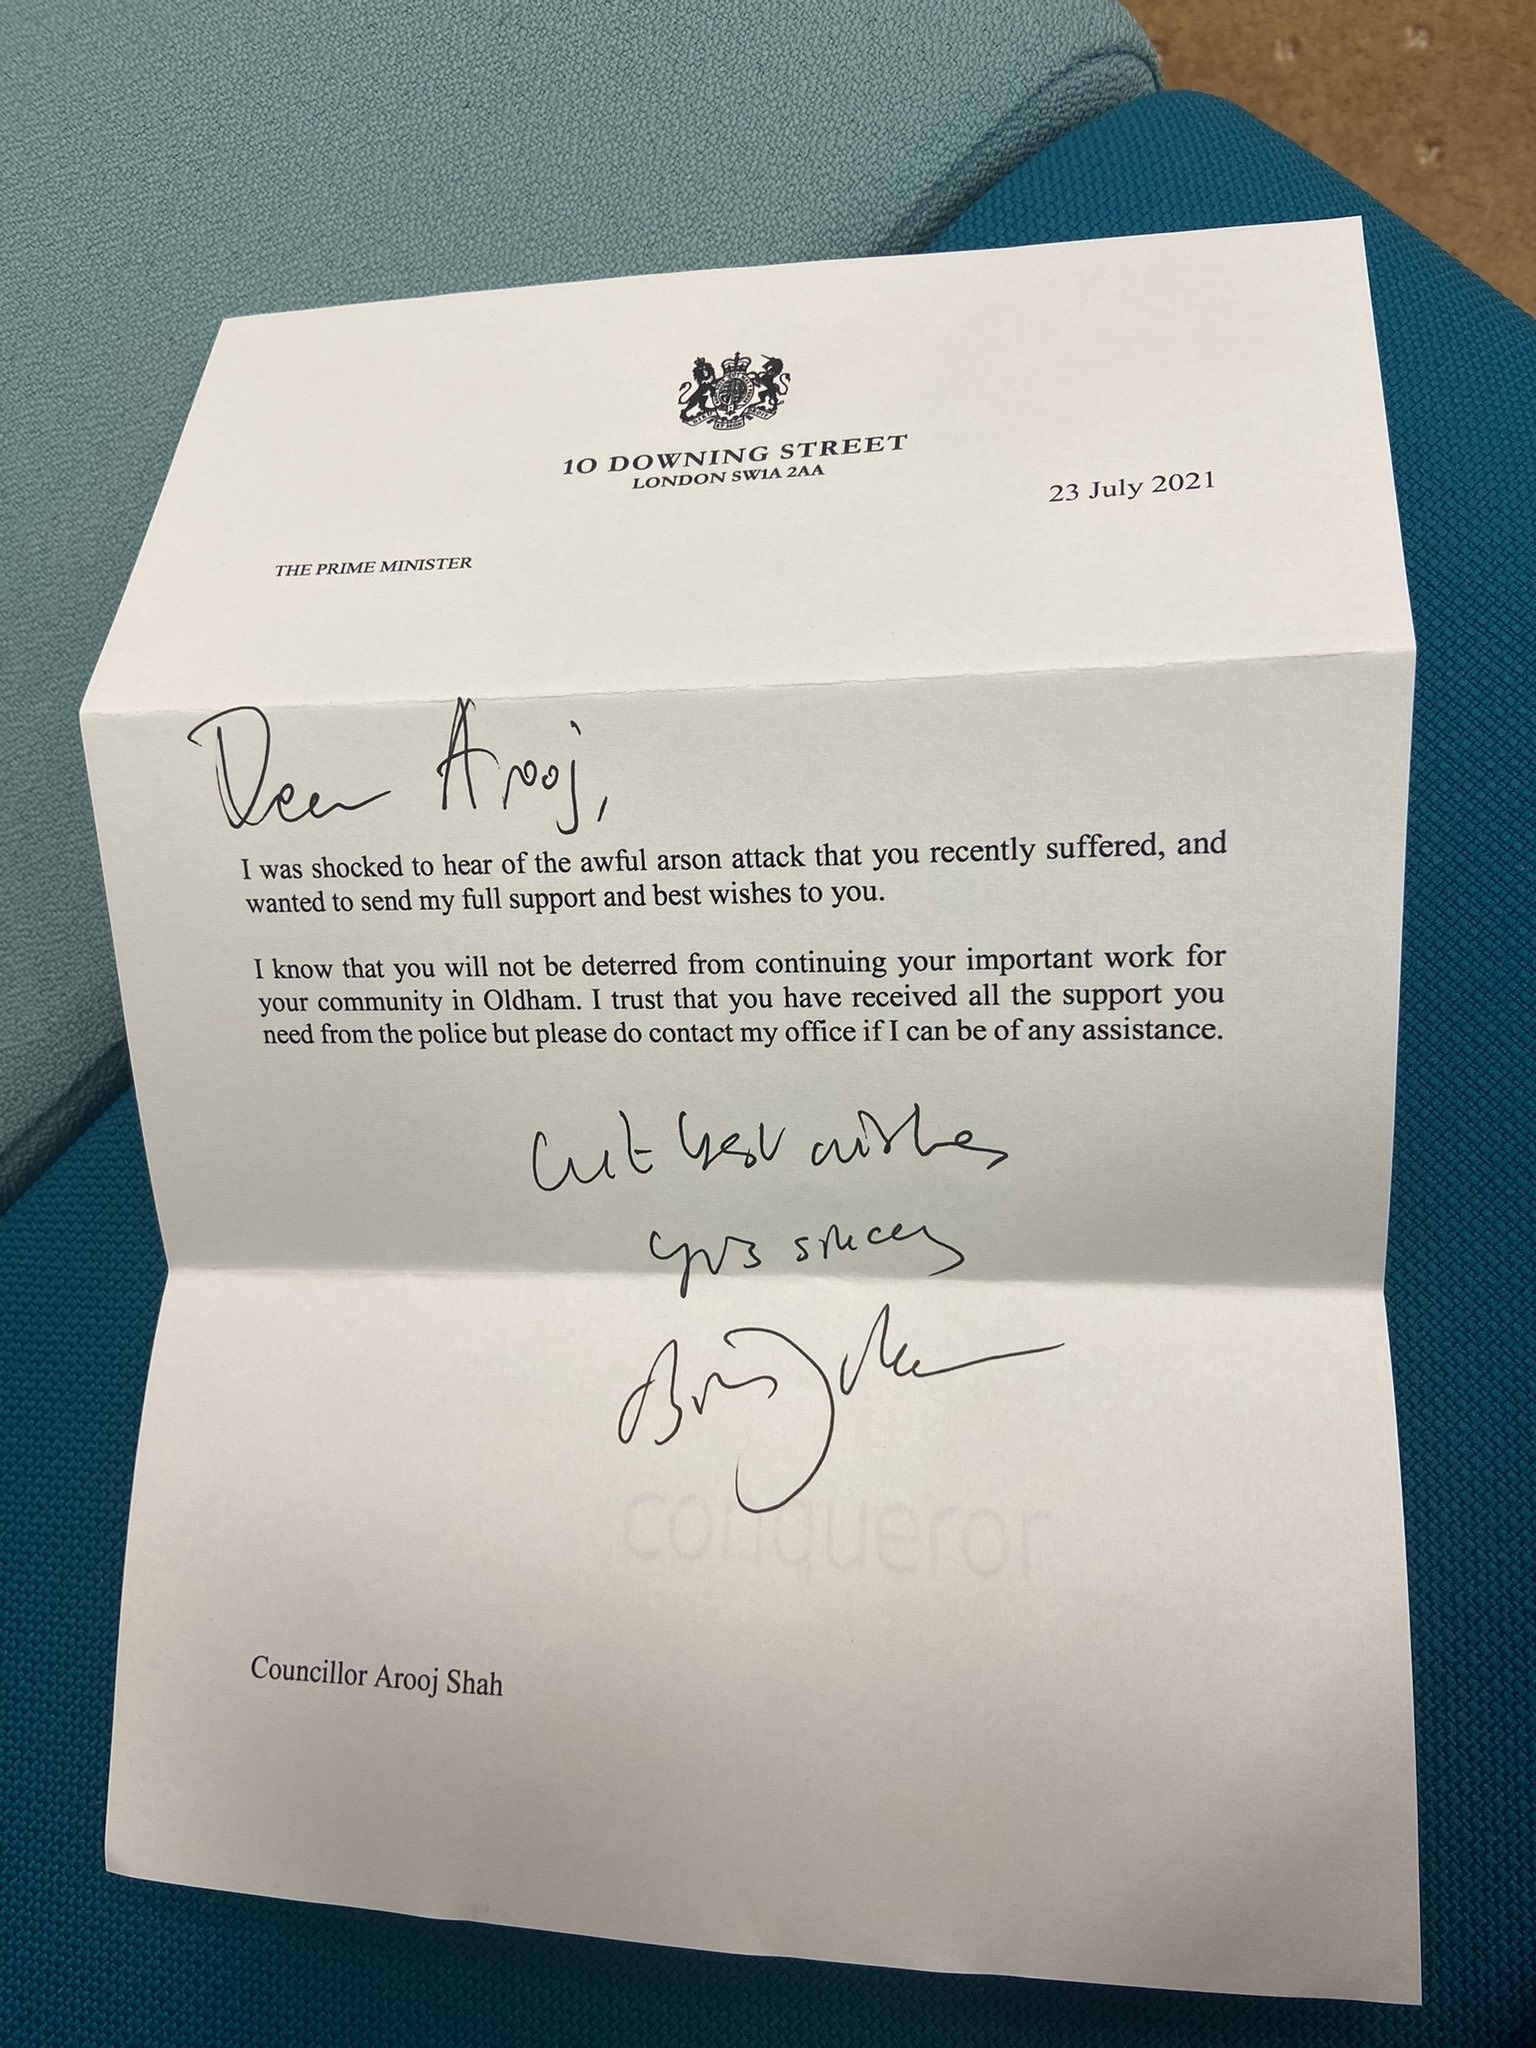 A letter from Prime Minister Boris Johnson to the council leader